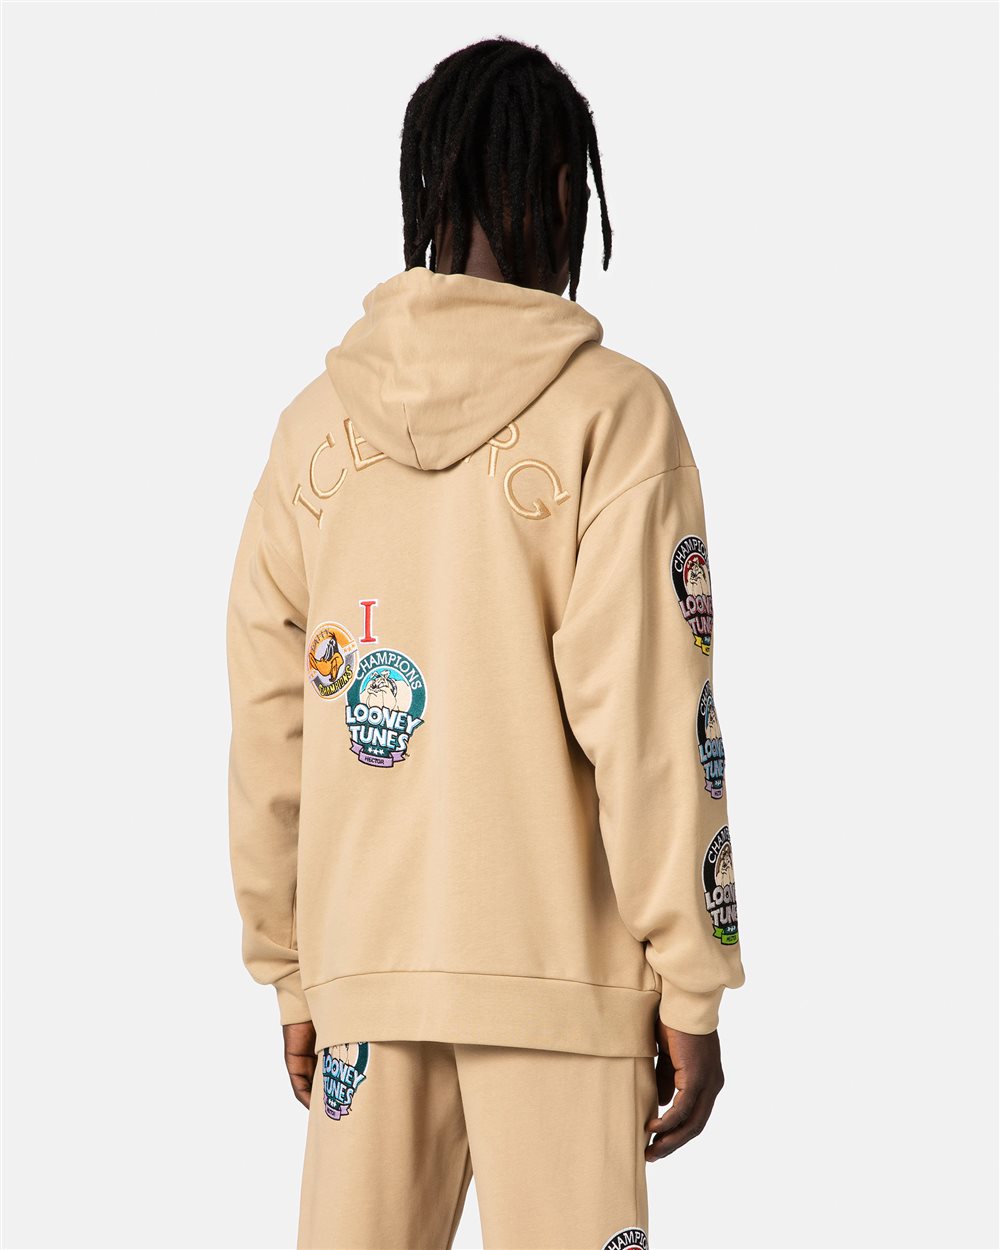 Hooded sweatshirt with | Tunes Iceberg patches Looney